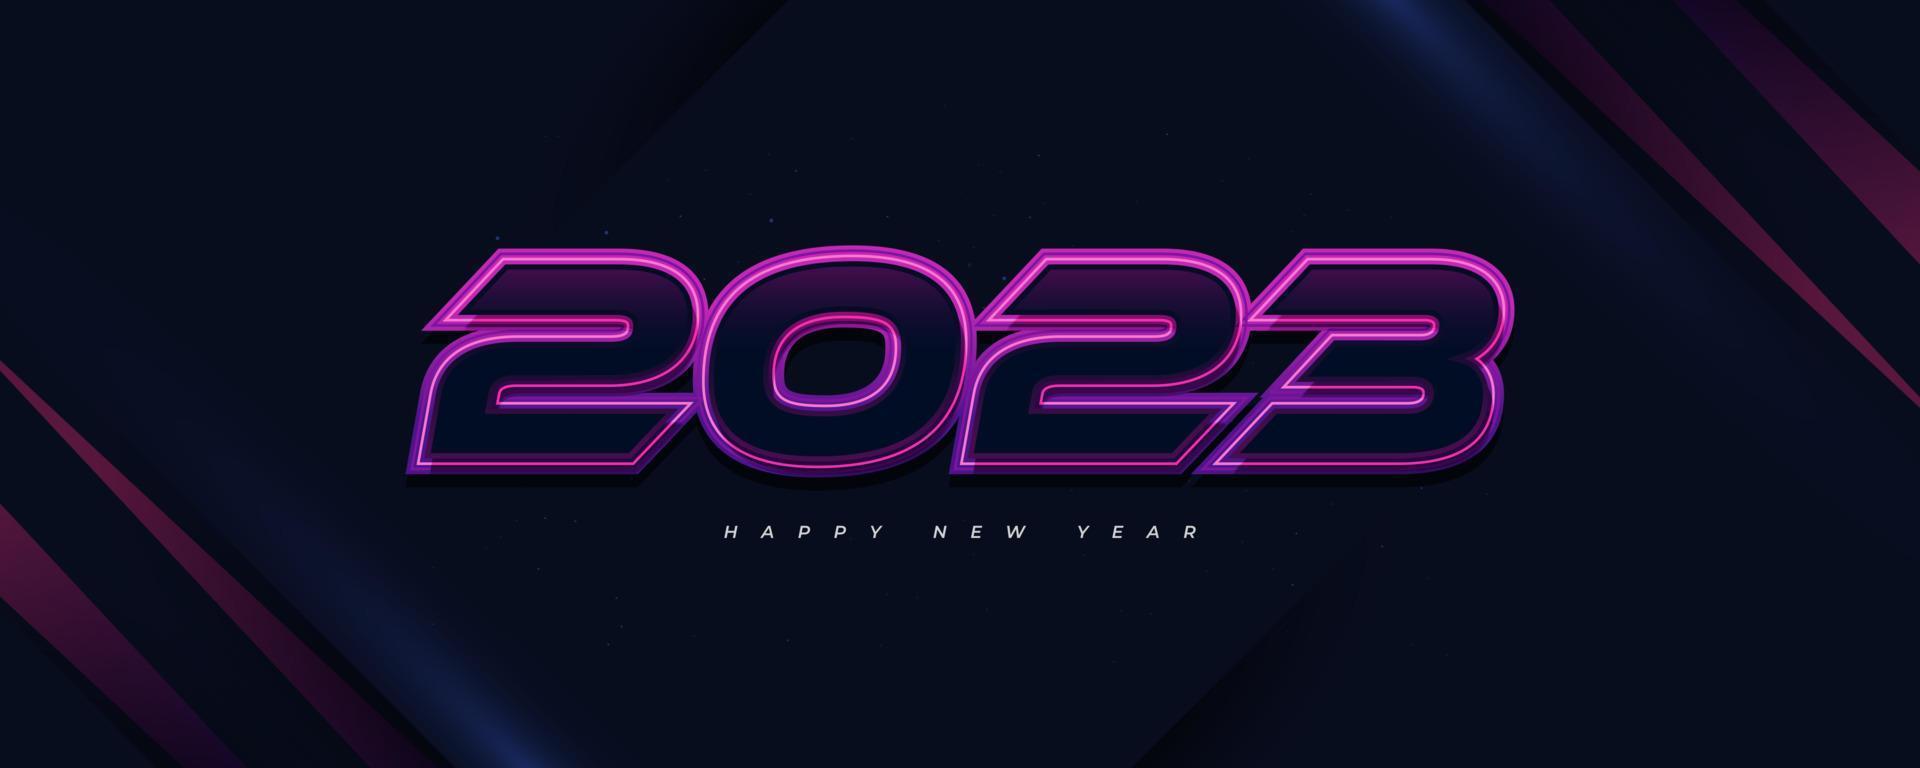 Happy New Year 2023 Banner with Futuristic Concept and Colorful Neon Effect. 2023 New Year Design Templates for Celebration, Background, Banner, Cover, Card, and Social Media Template vector